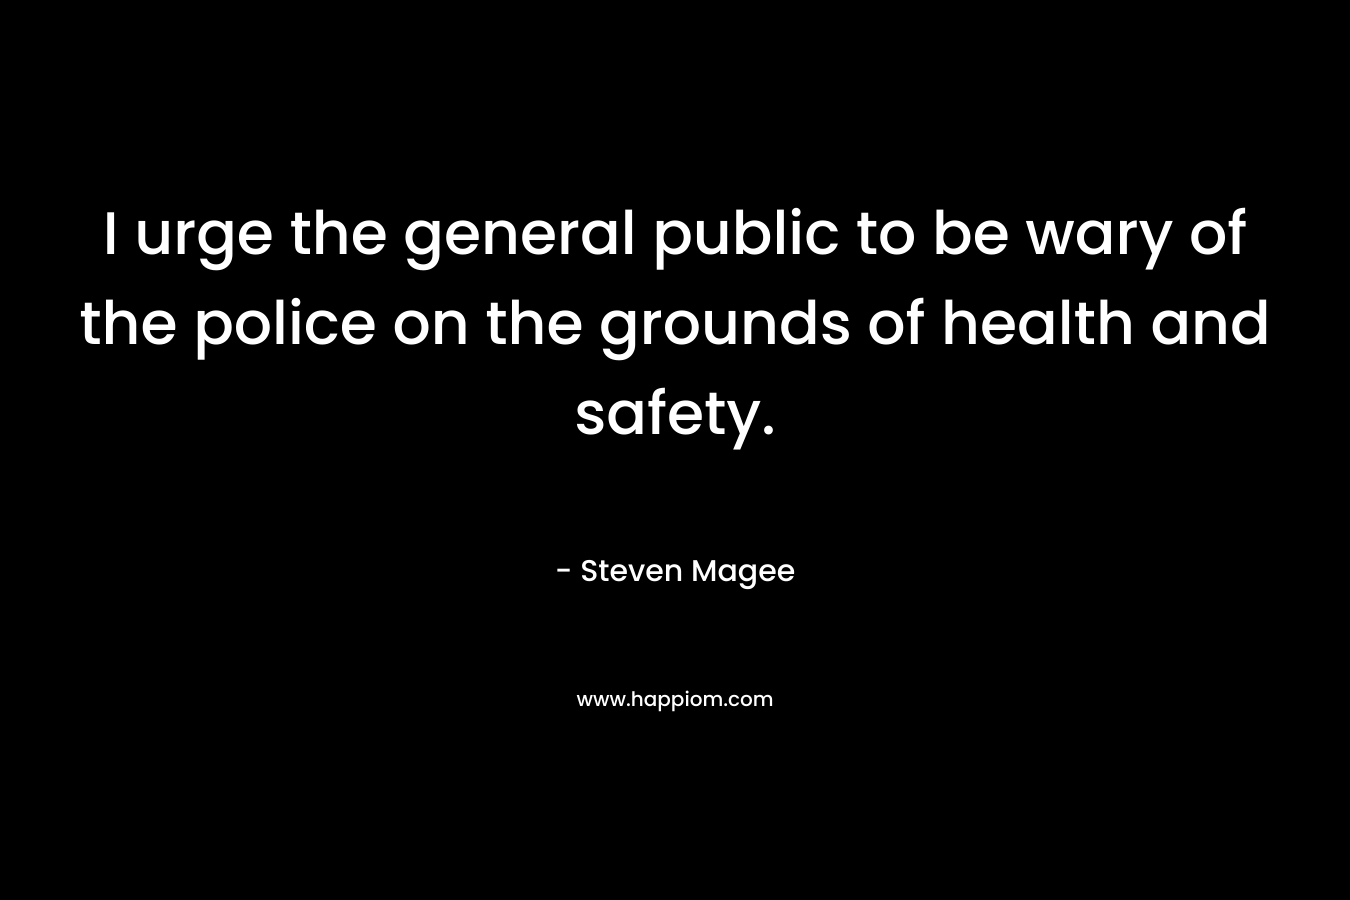 I urge the general public to be wary of the police on the grounds of health and safety. – Steven Magee